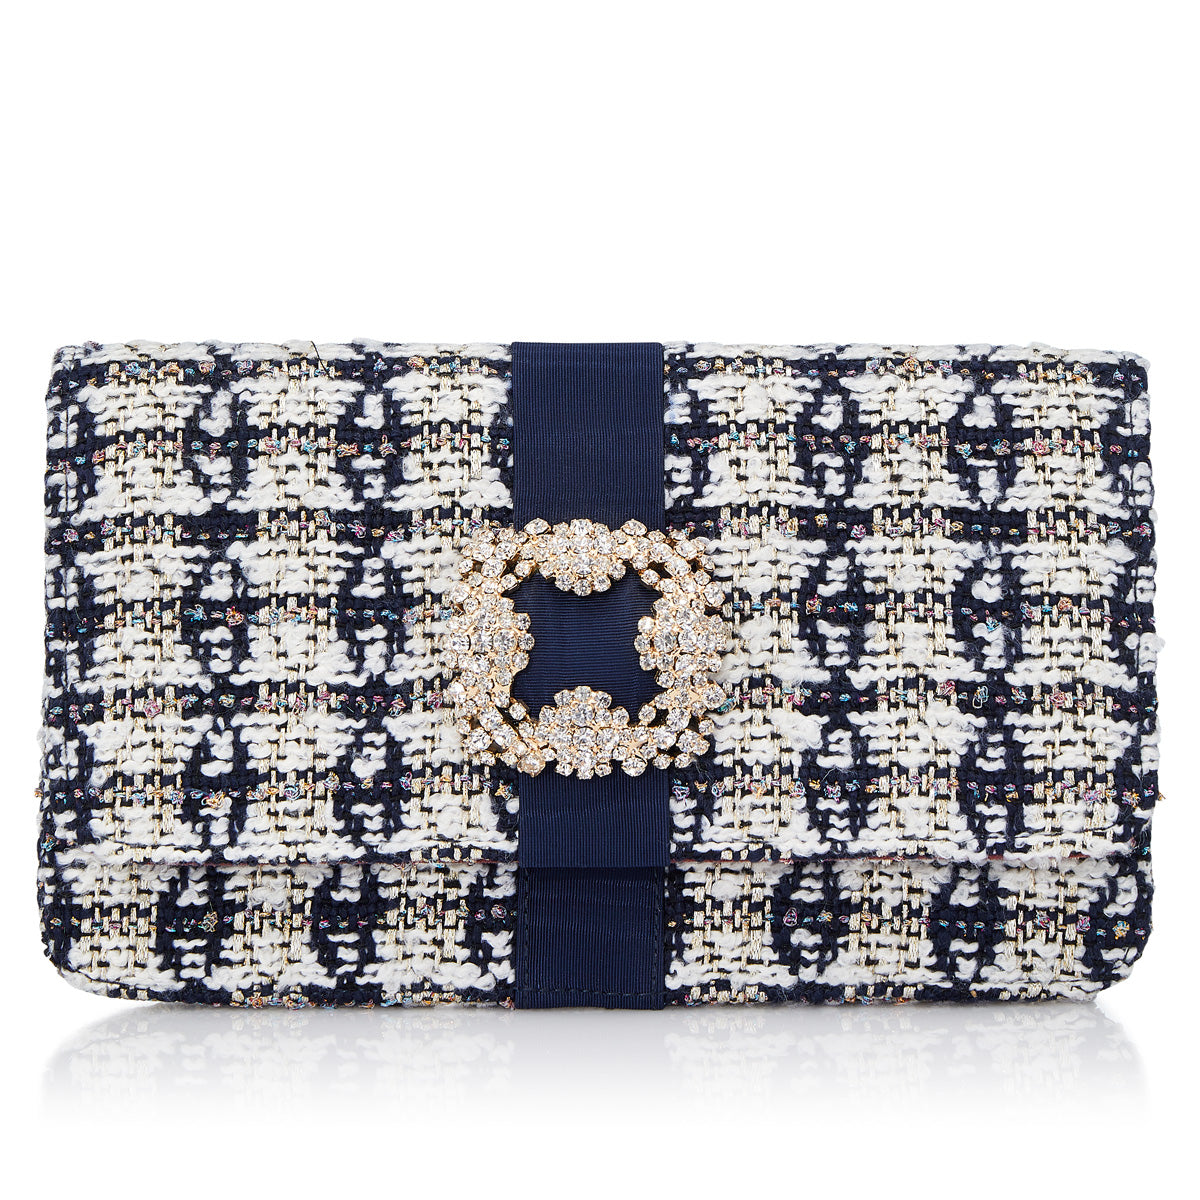 White, navy blue and gold tweed print clutch with gold clasp